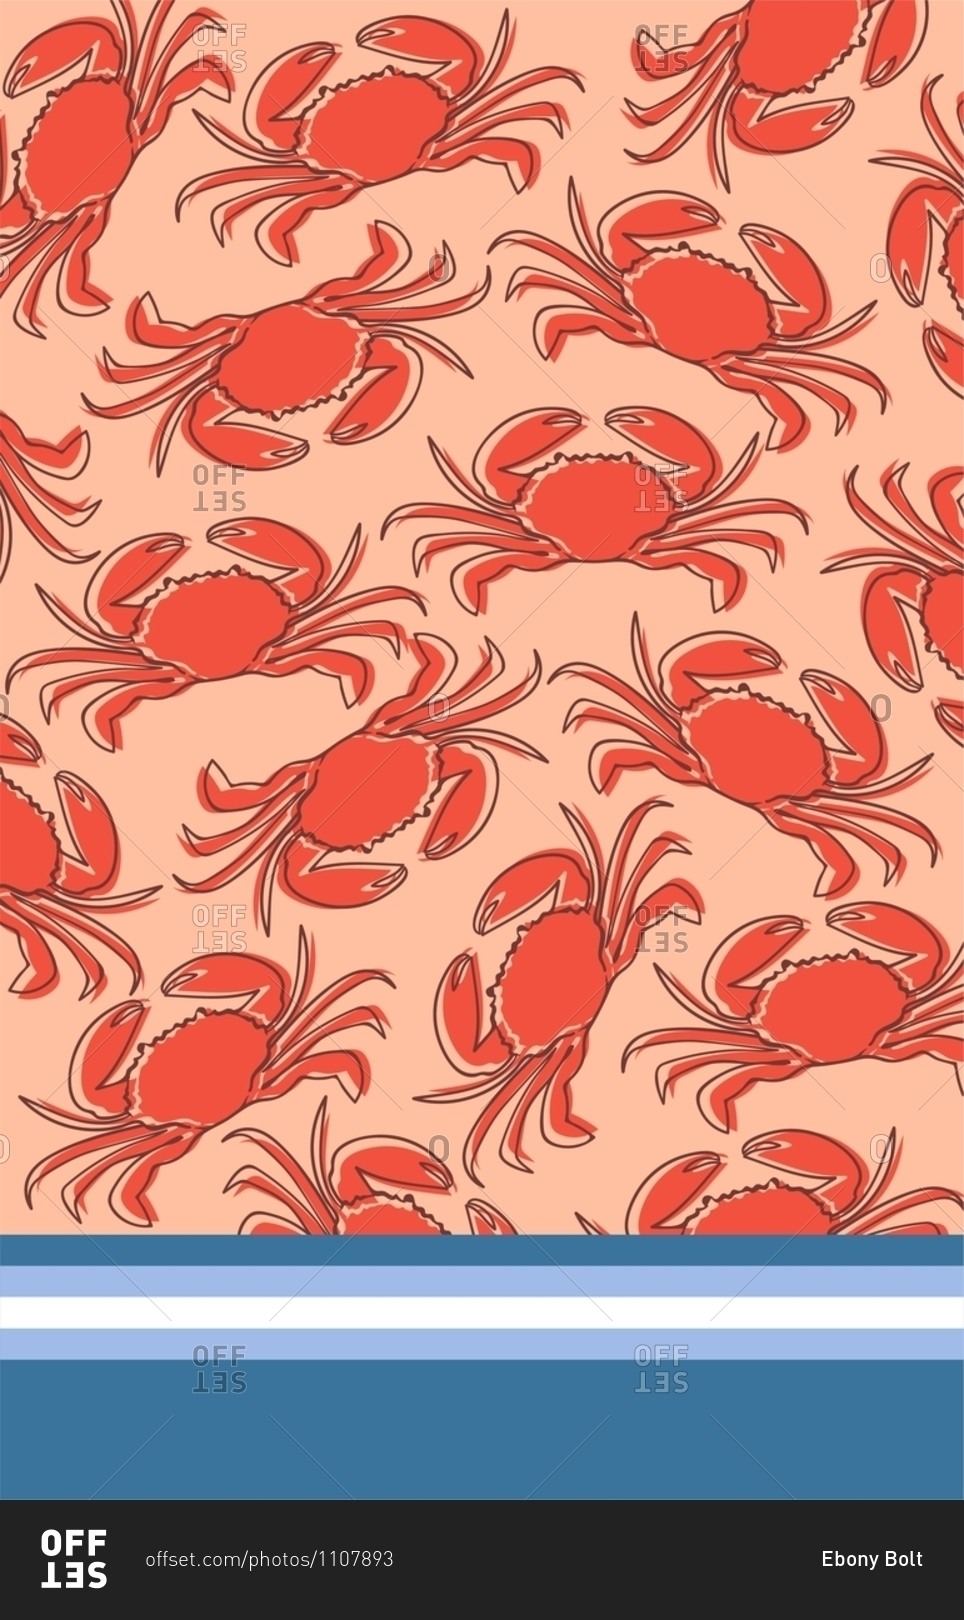 Crab motifs in a tossed layout with a contrasting border
stock photo - OFFSET